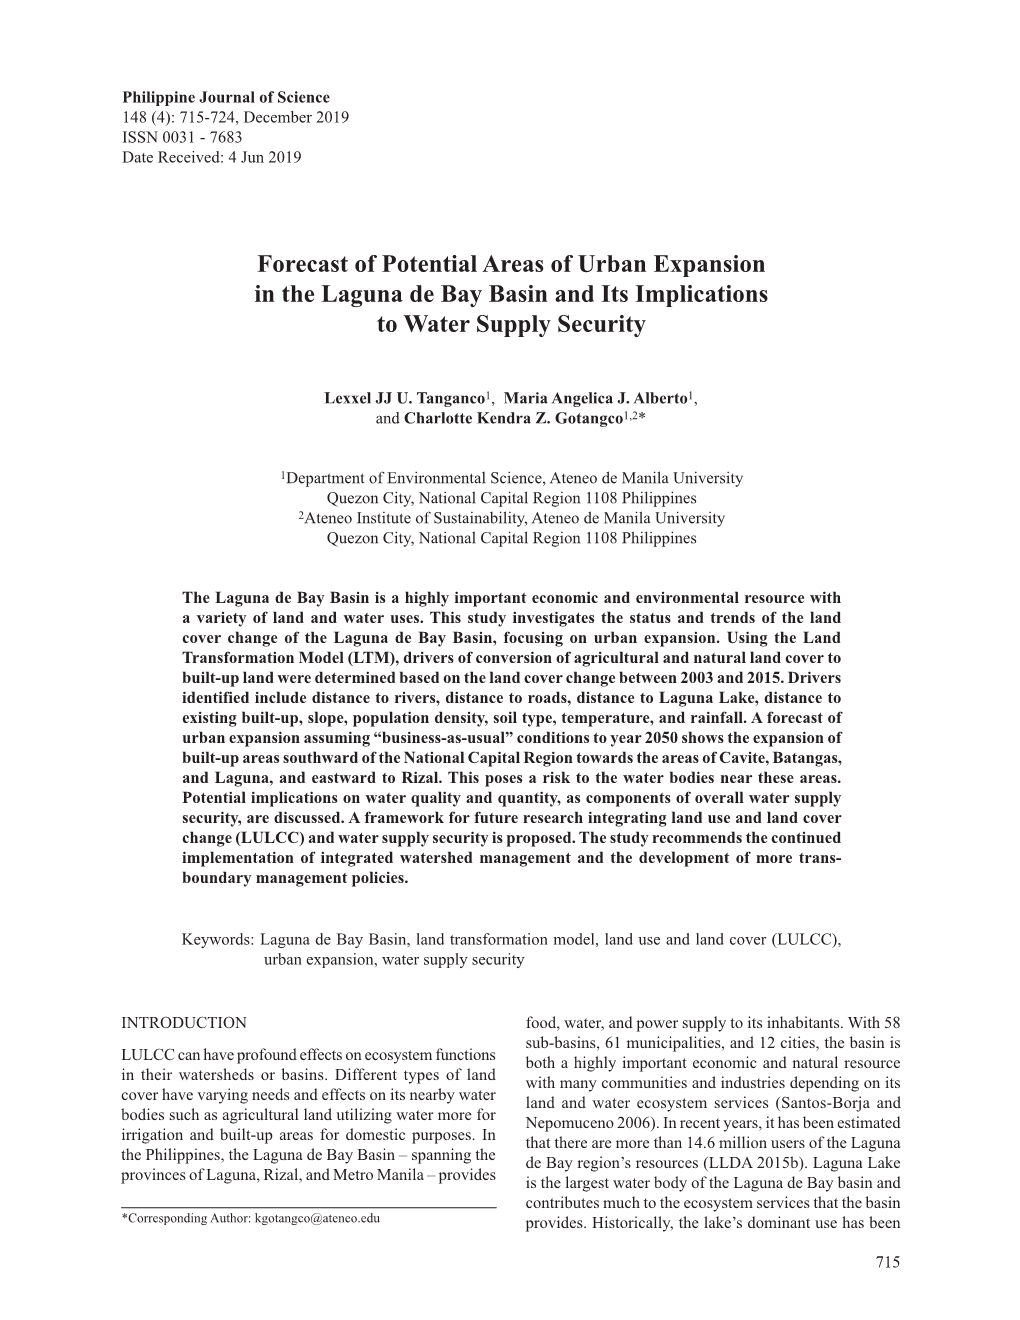 Forecast of Potential Areas of Urban Expansion in the Laguna De Bay Basin and Its Implications to Water Supply Security